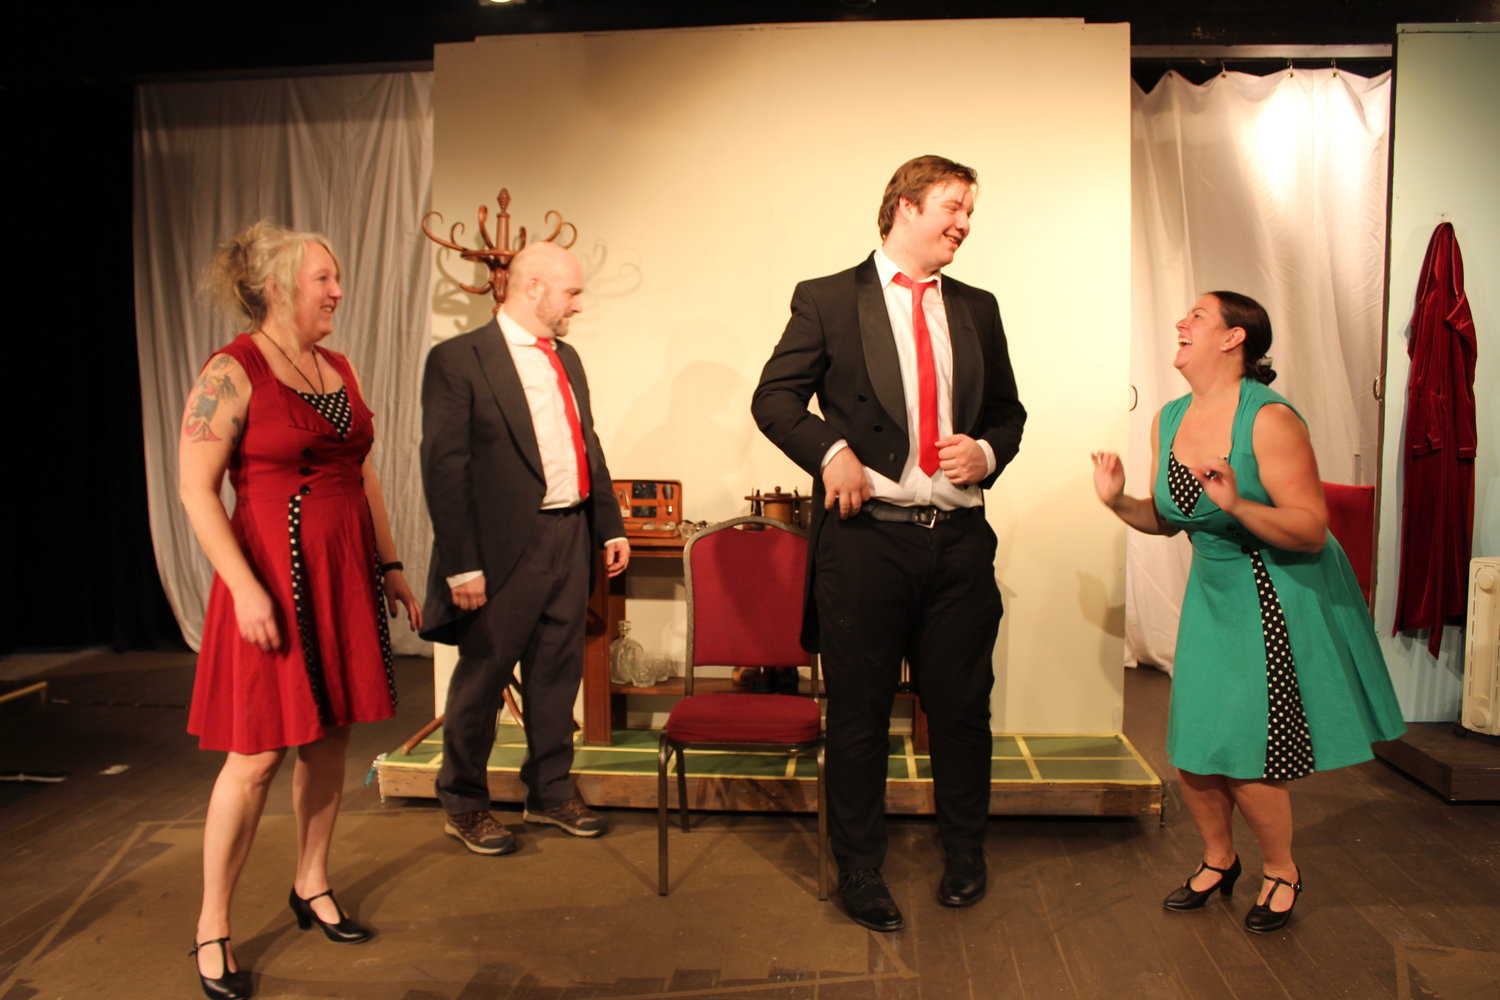 Singing duo Bob, portrayed by Noah McKenzieSullivan, and Phil, portrayed by Sean-Patrick McNeal, talk with chorus girl admirers Rita, portrayed by Michelle Lucero, and Rhoda, portrayed by Nicole Galyean in "White Christmas."